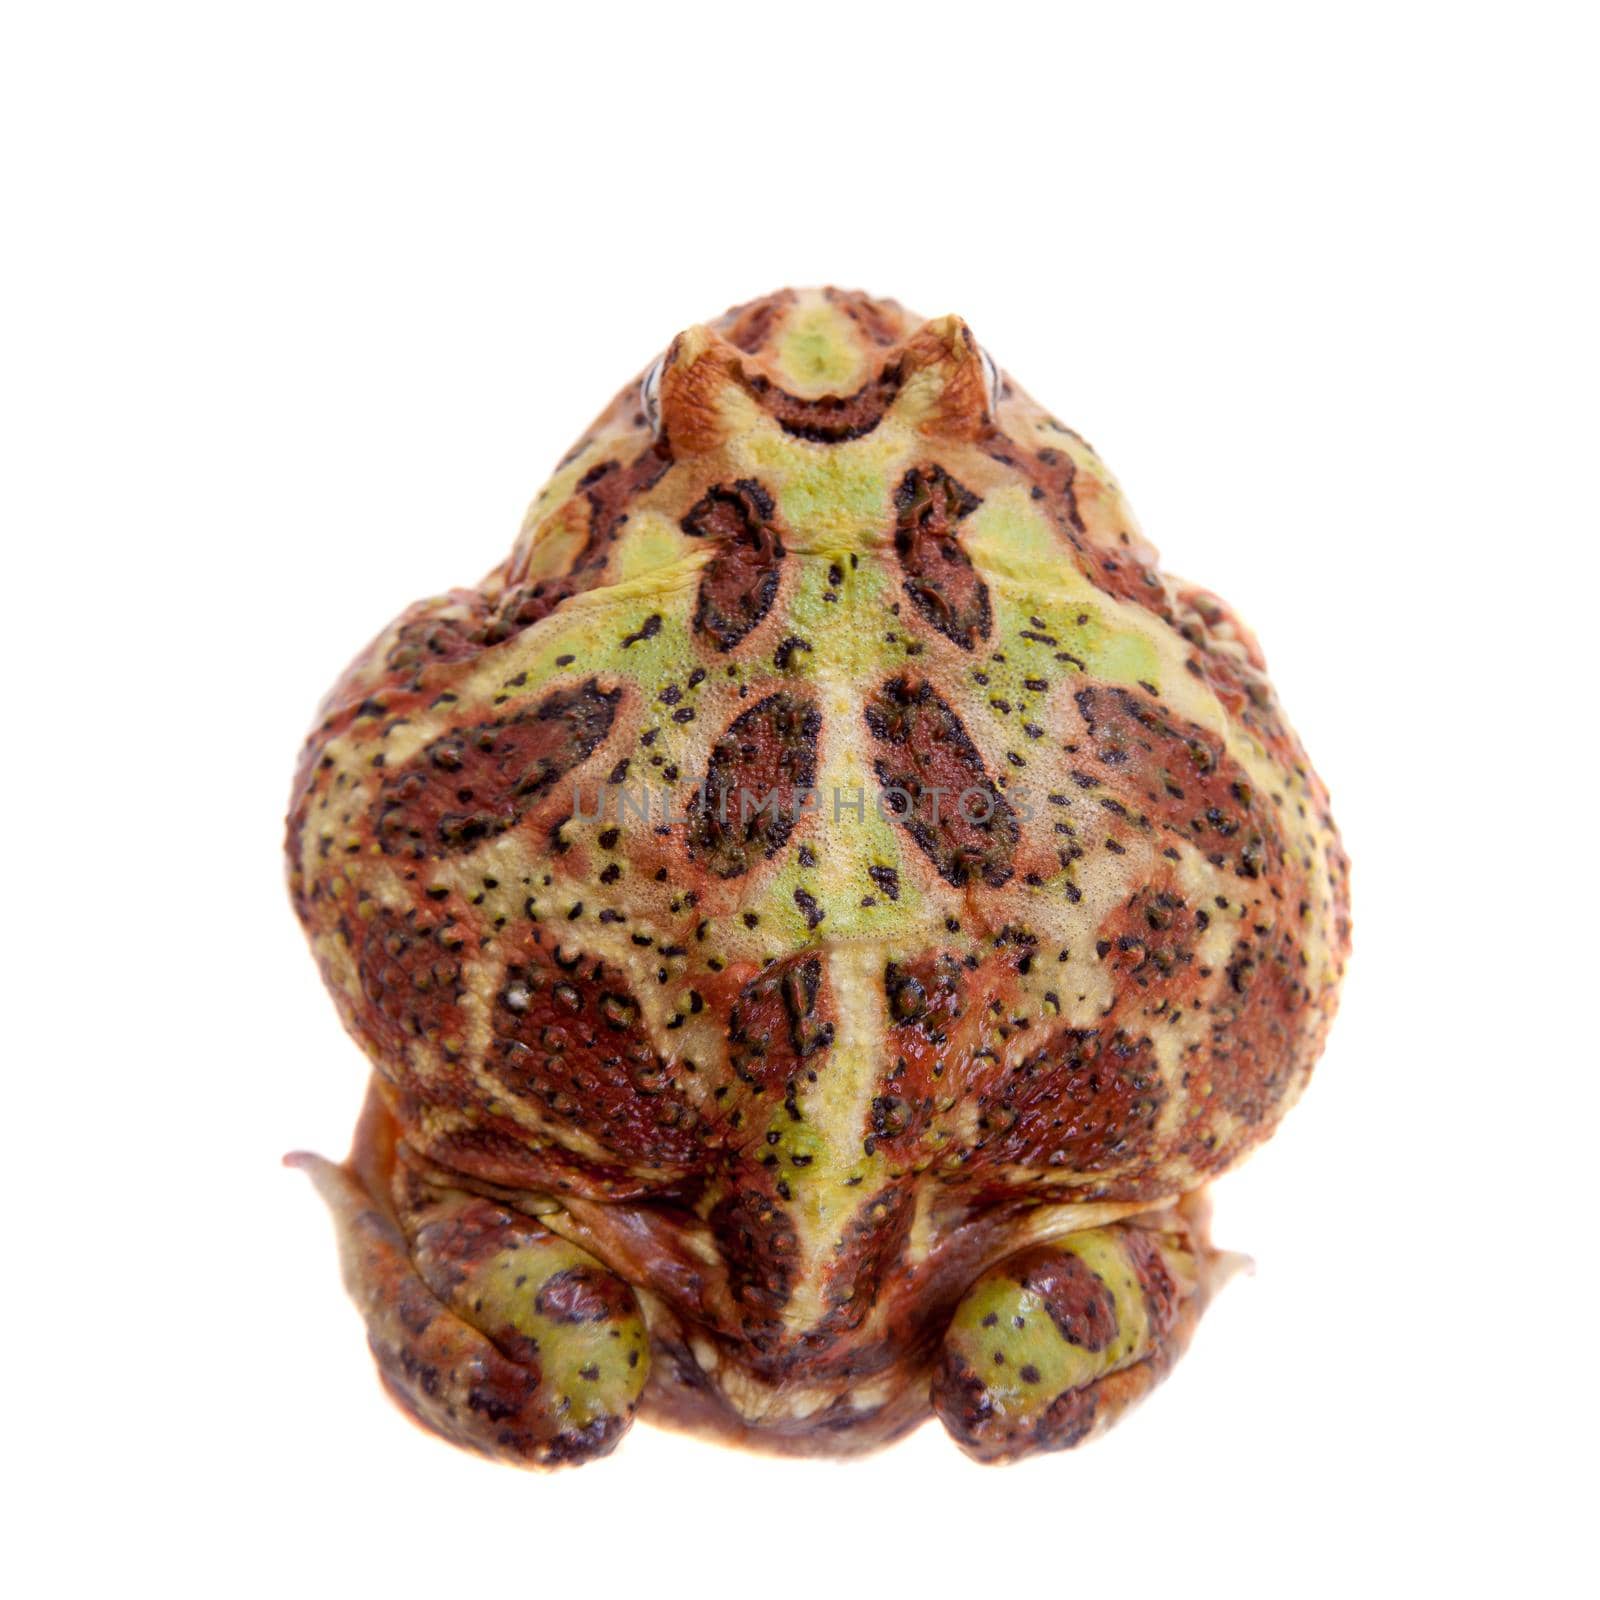 The Cranwell's horned frog, Ceratophrys cranwelli, isolated on white background